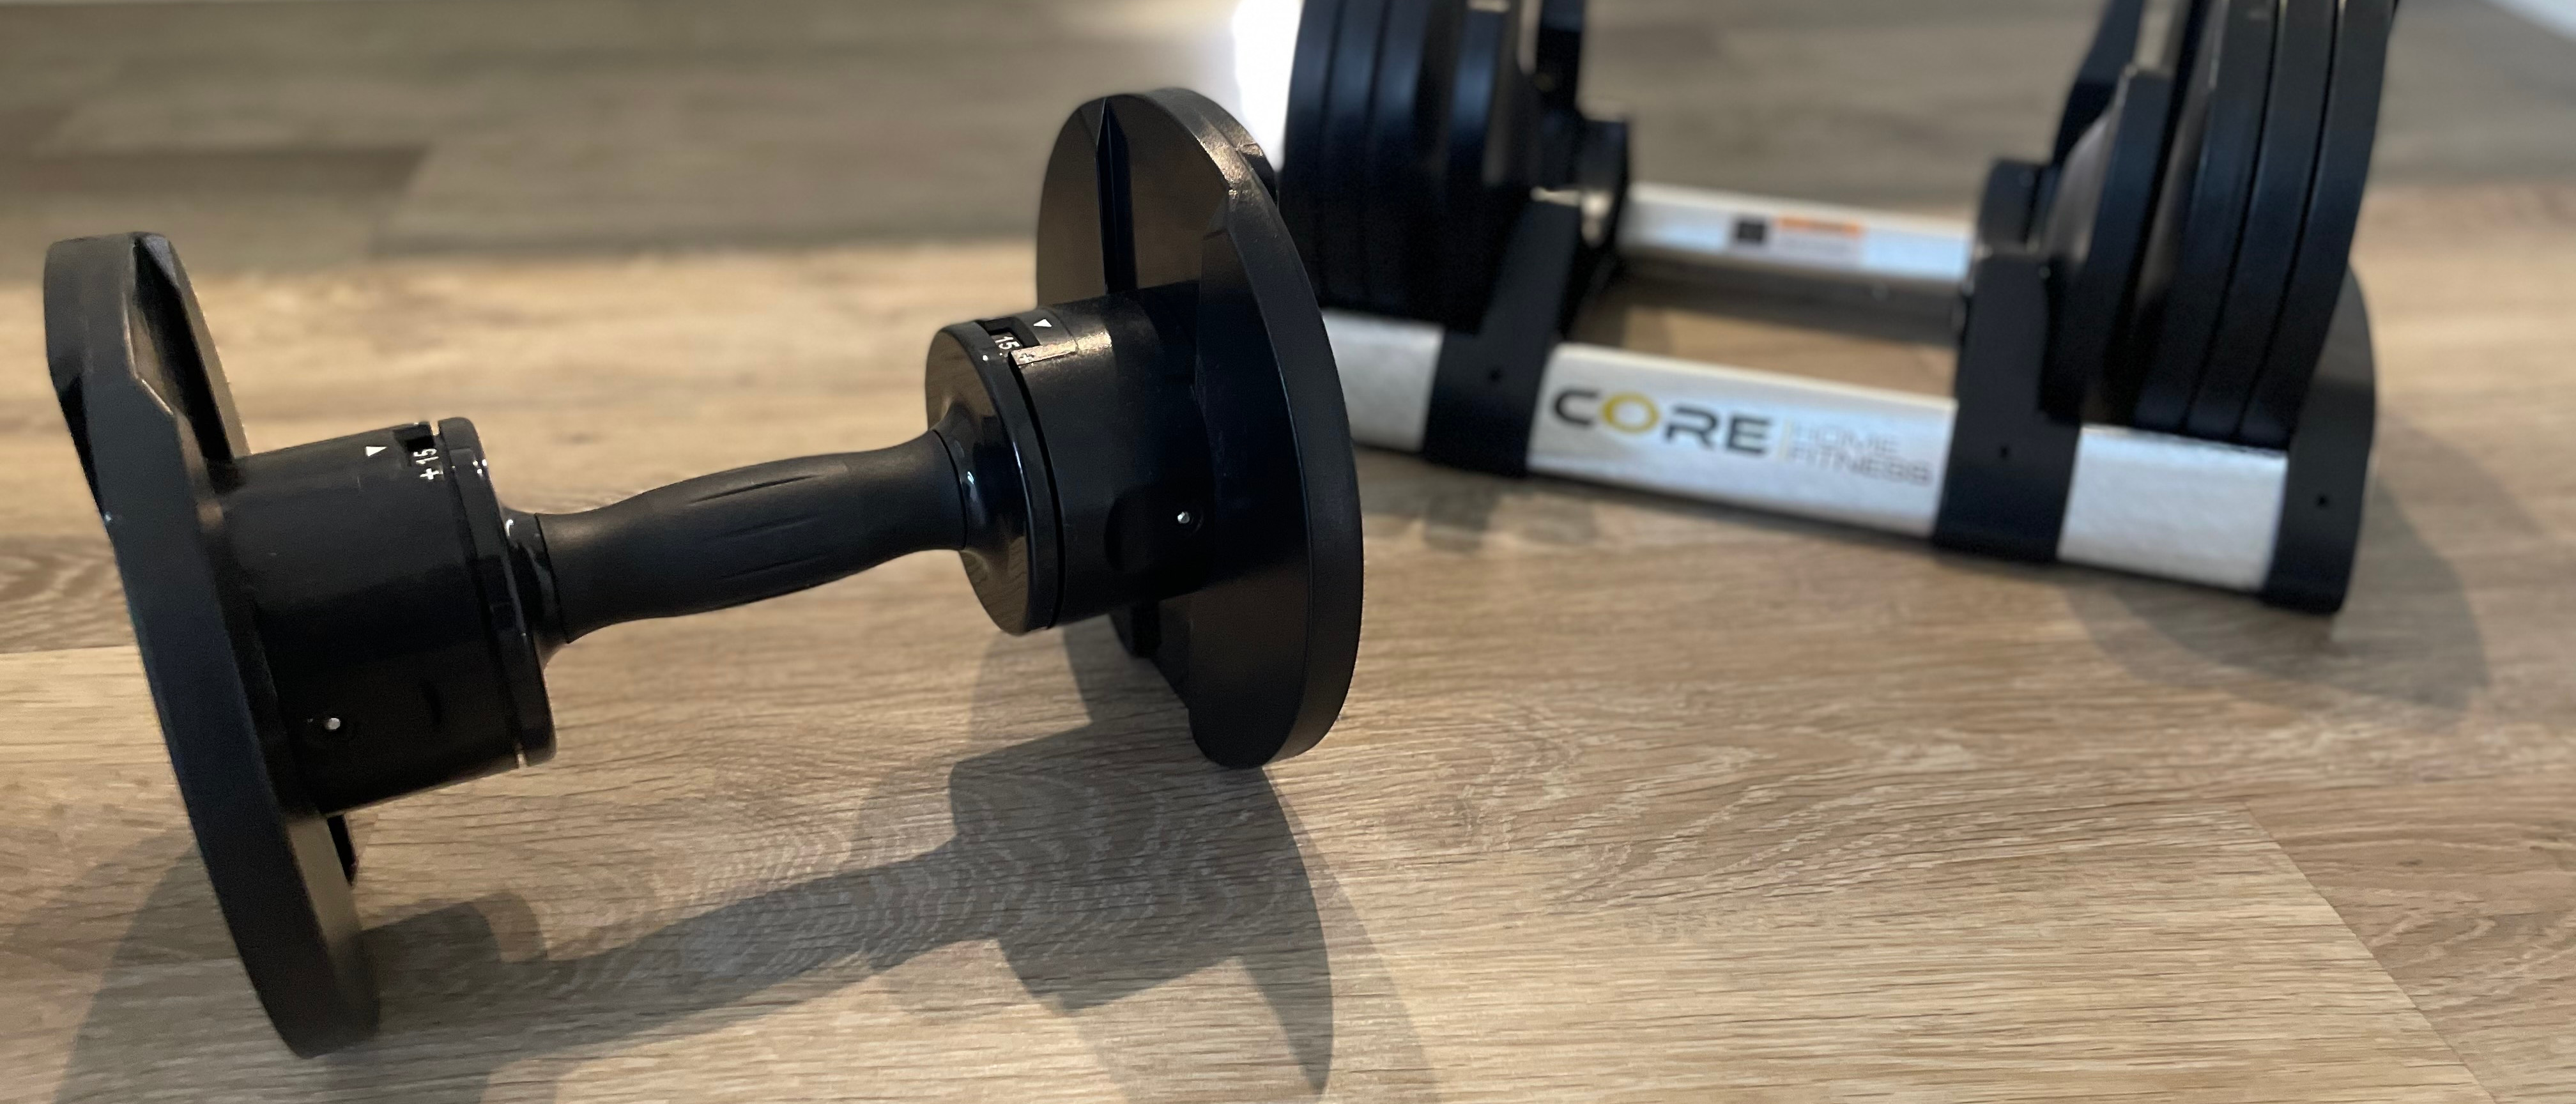 Core Home Fitness Adjustable Dumbbell Set review | TechRadar